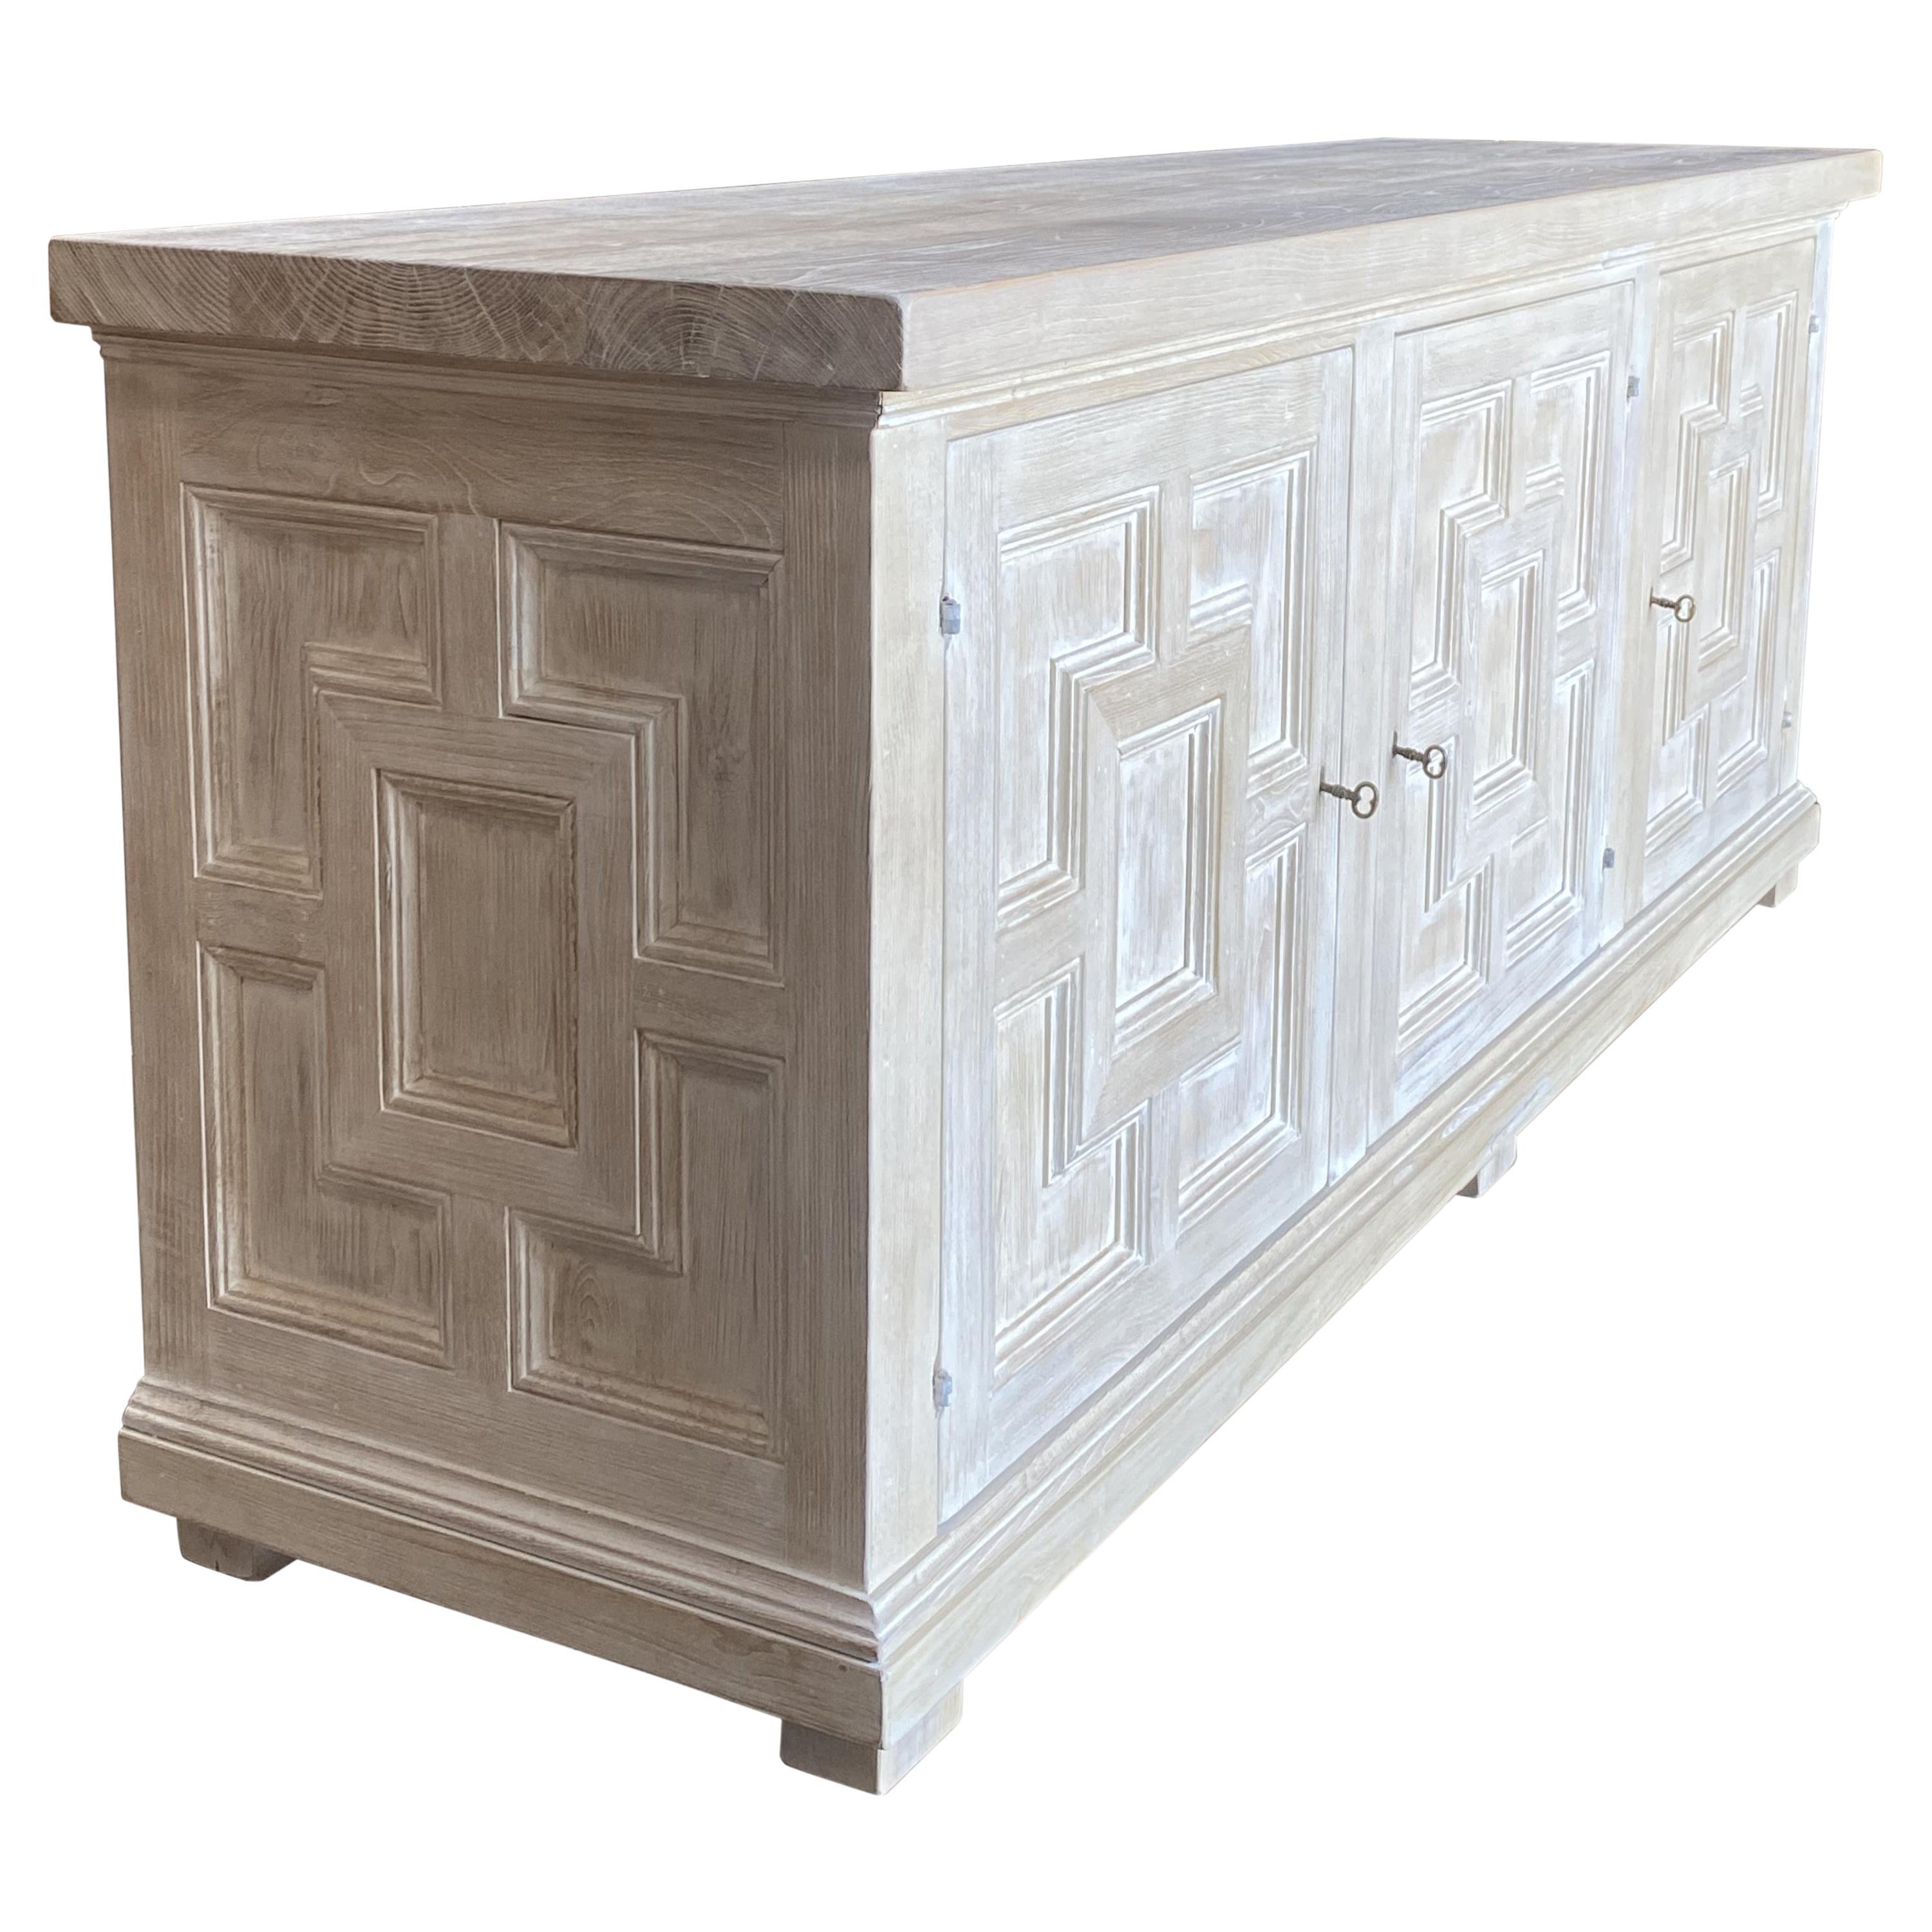 In Stock
FORTE - Introducing our exclusive Mediterranean style credenza line - a strong architectural statement, softened with a modern finish.  Solid, aged Italian chestnut with our brushed 